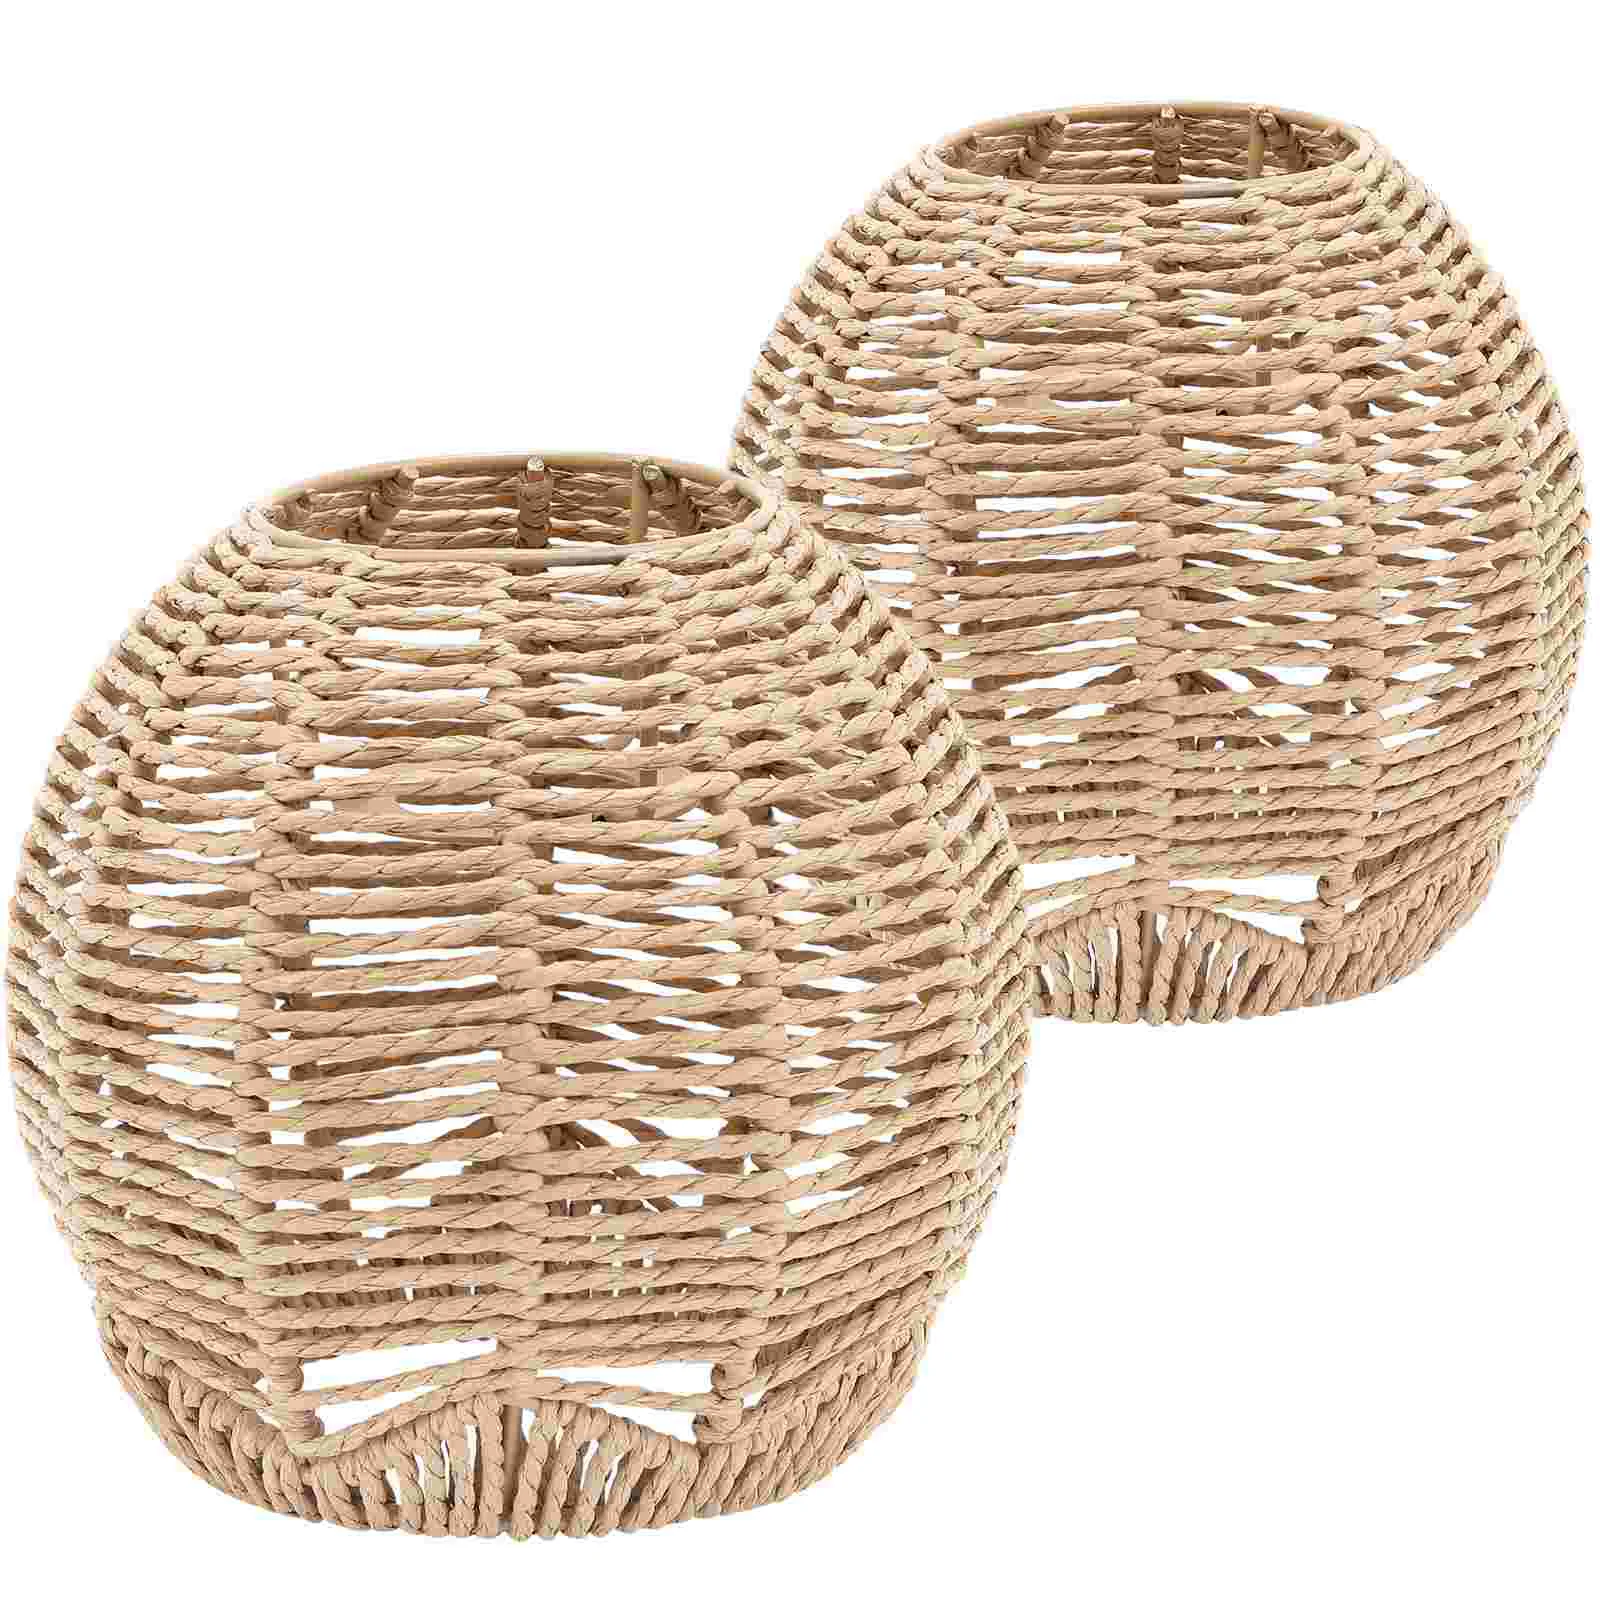 

2 Pcs Chandelier Lamp Shade Lanterns Decorative Pendant Rattan Light Bulb Lampshade Small Shades Cover Basket Weave Cage Guard